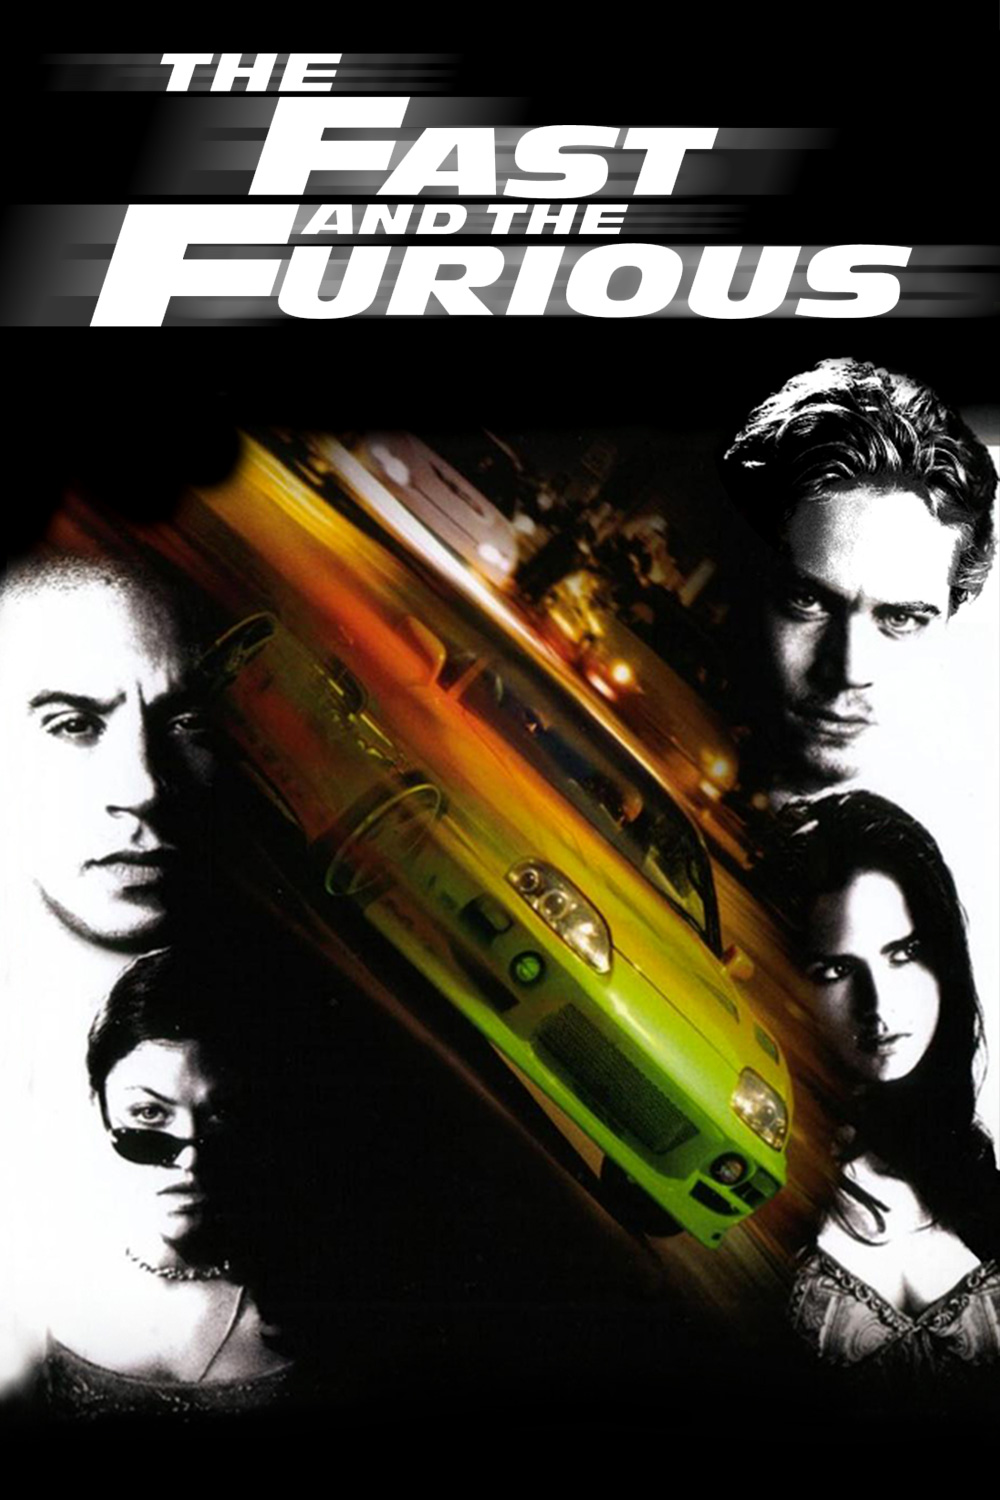 The Fast and the Furious **** (2001, Vin Diesel, Paul Walker, Michelle